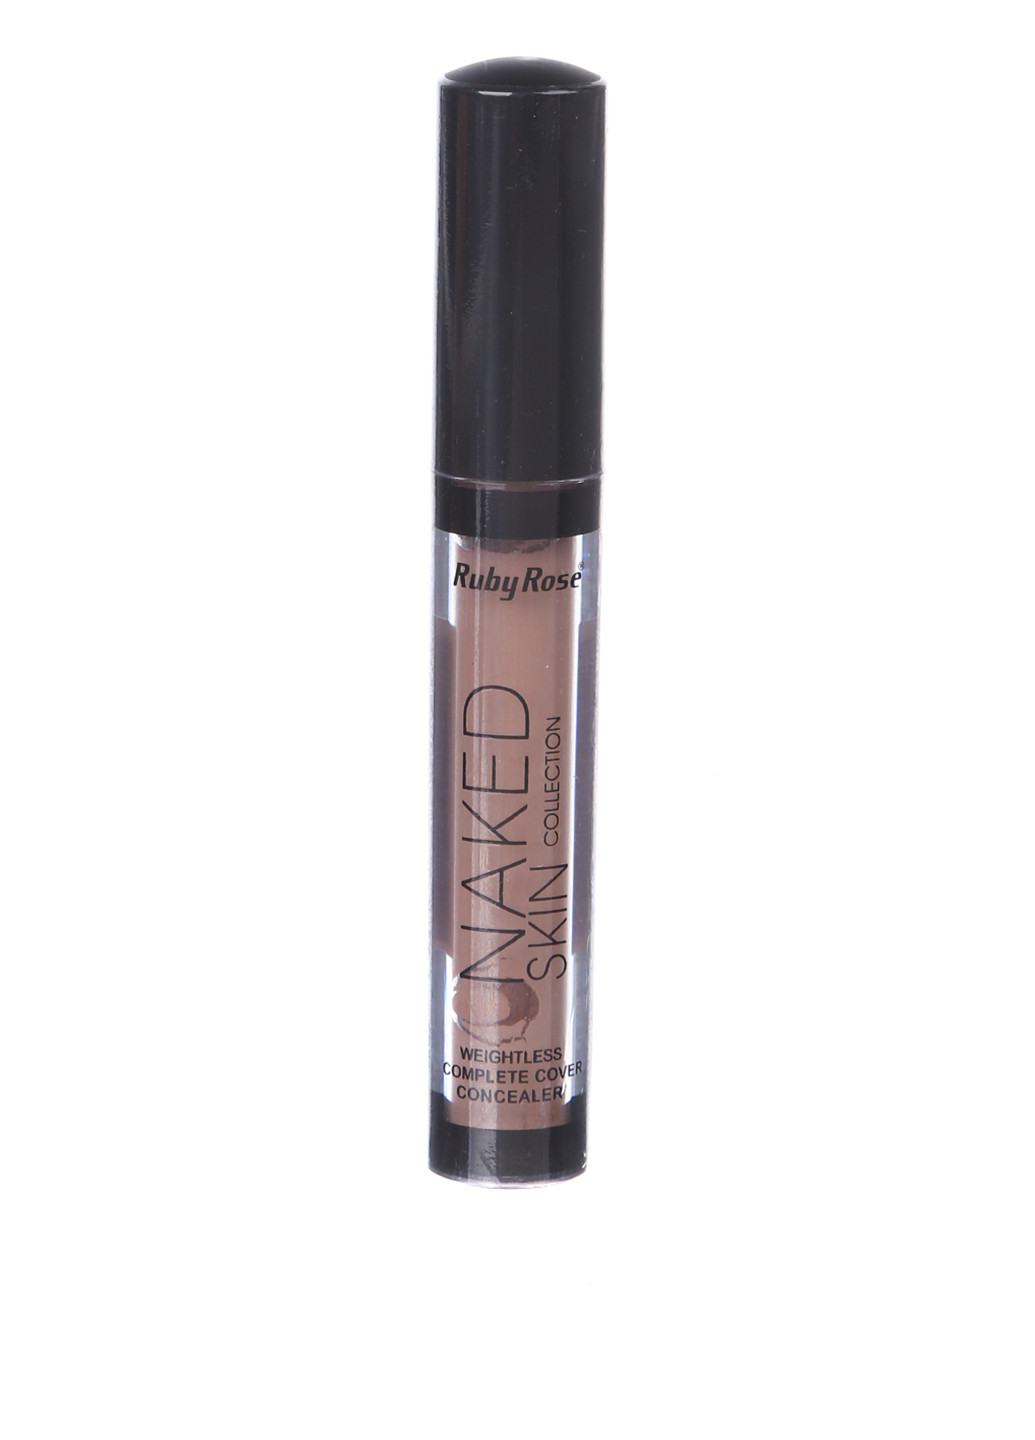 Жидкий консилер Naked Skin Weightless Complete Cover Concealer, НВ-8080 №4, 4 г Ruby Rose (27530883)